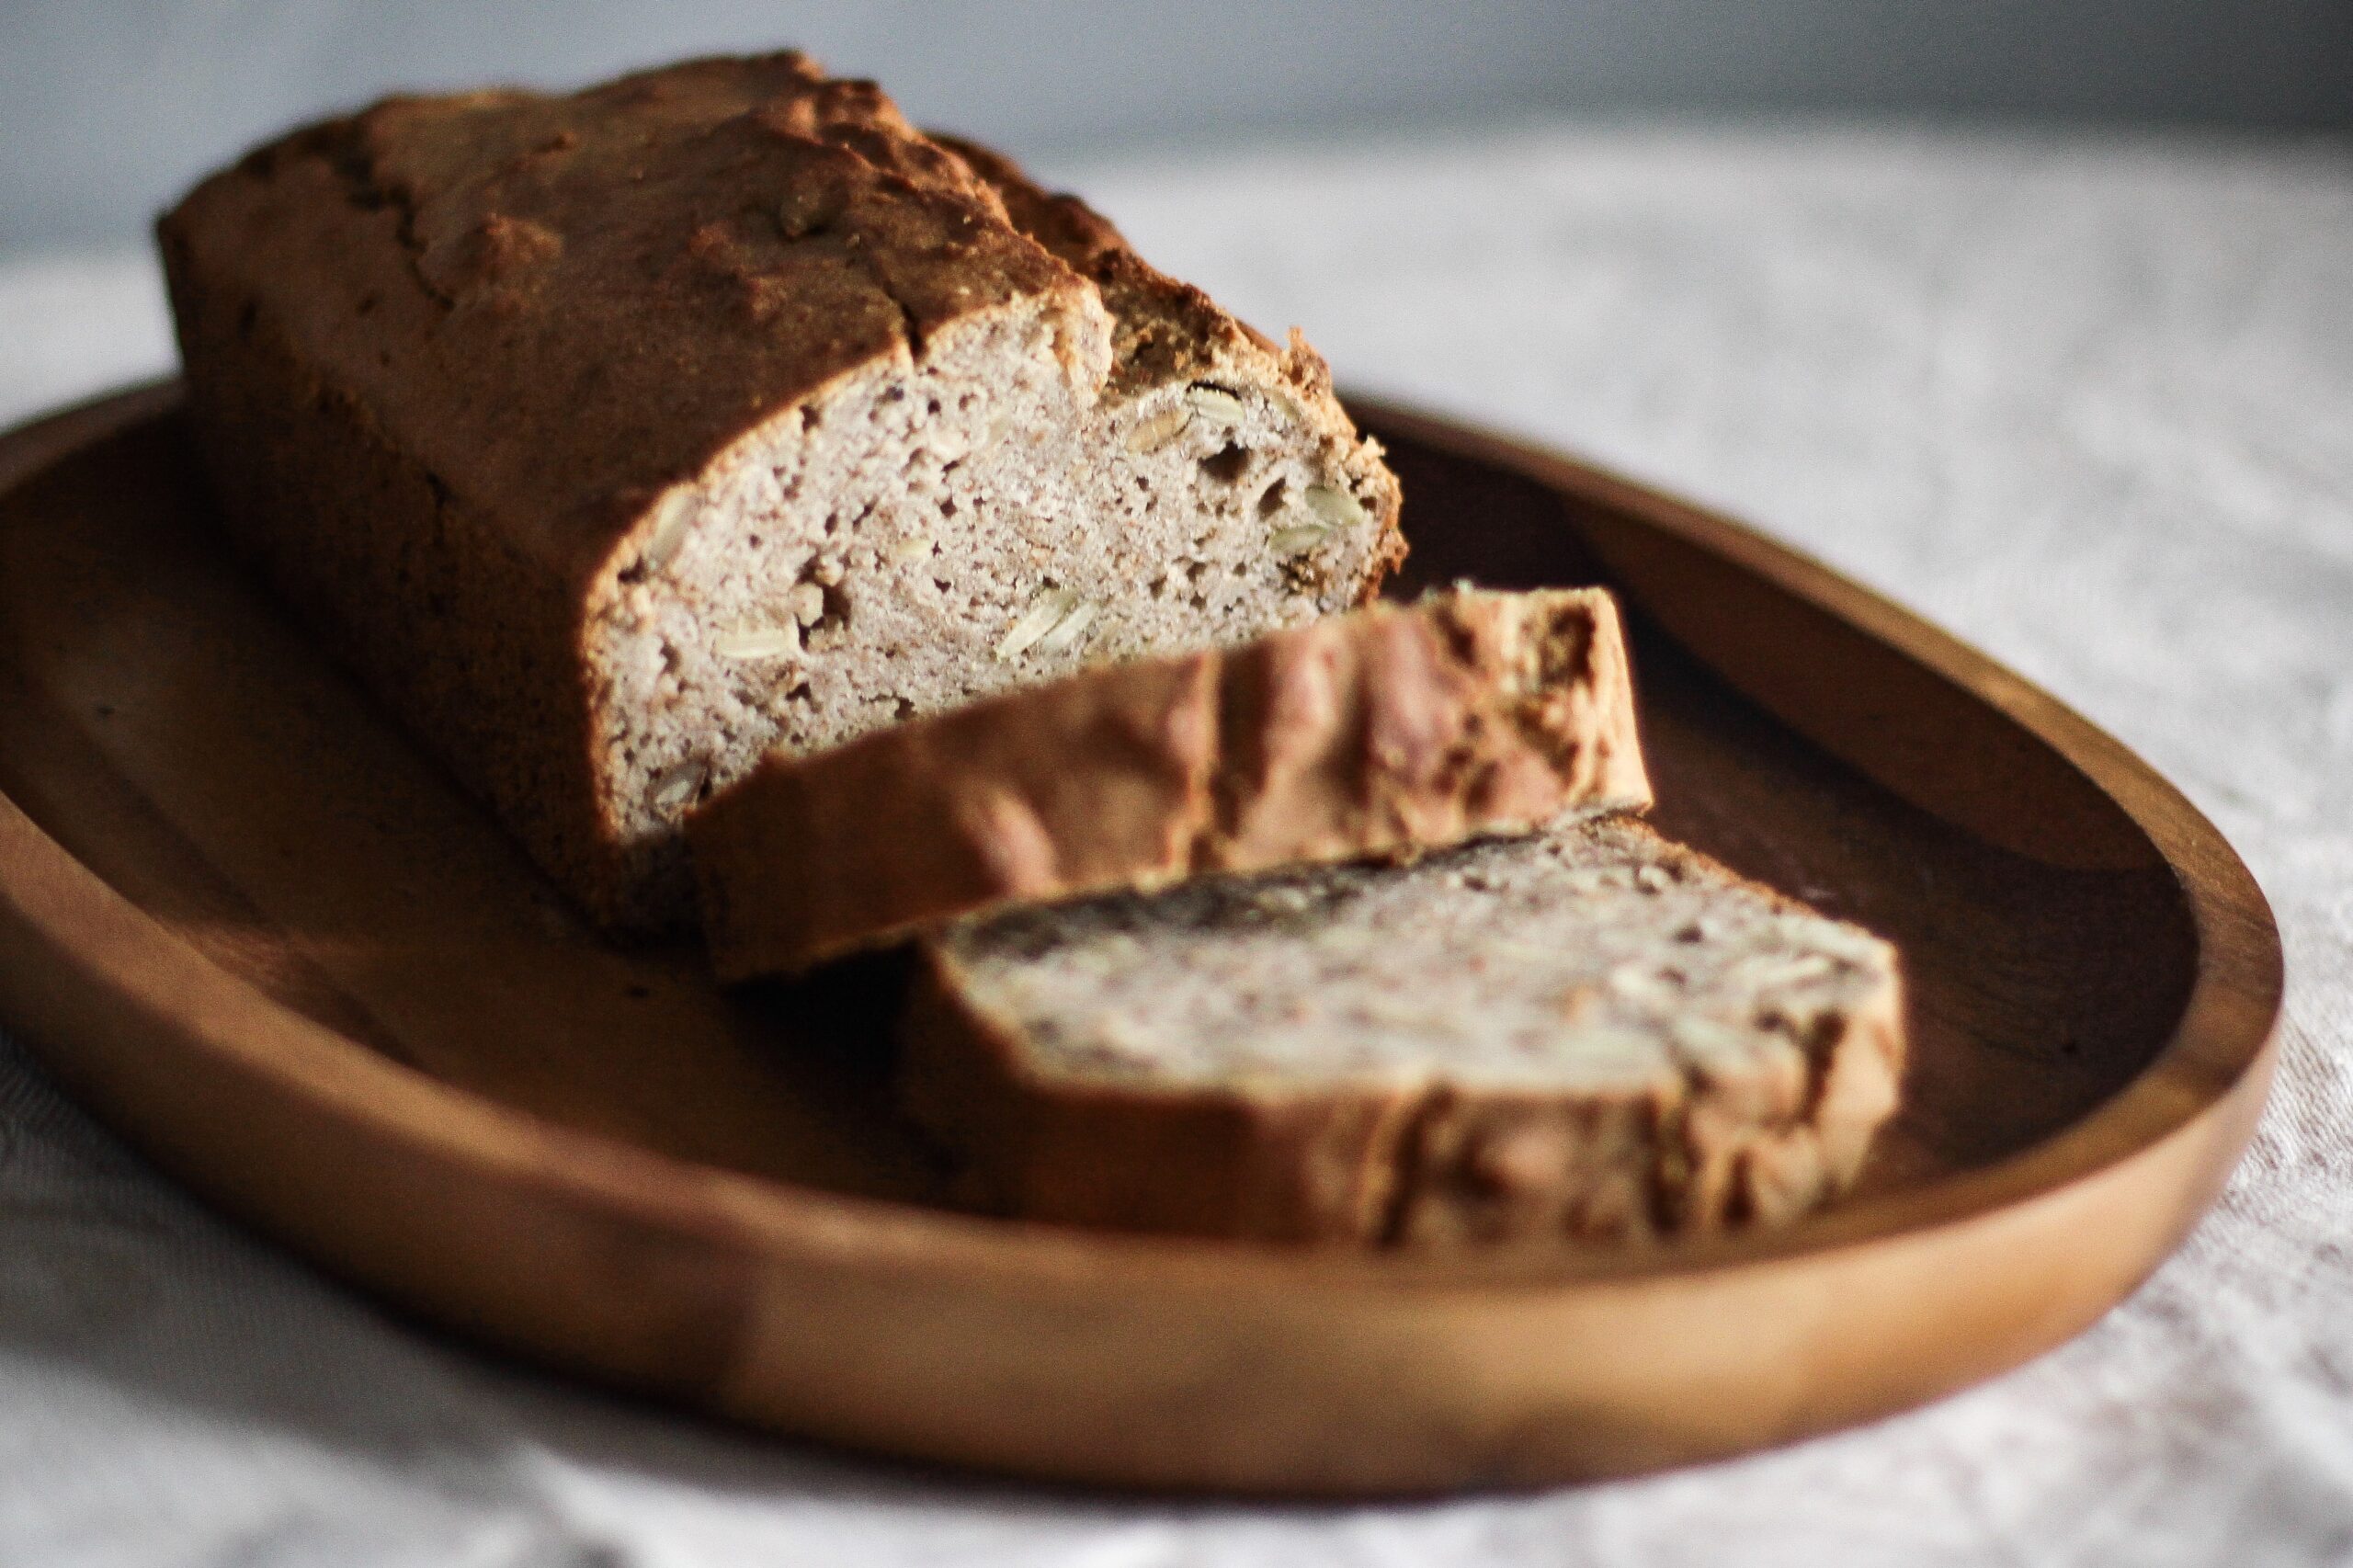 Making Your Own Bread Has More Benefits Than You Think